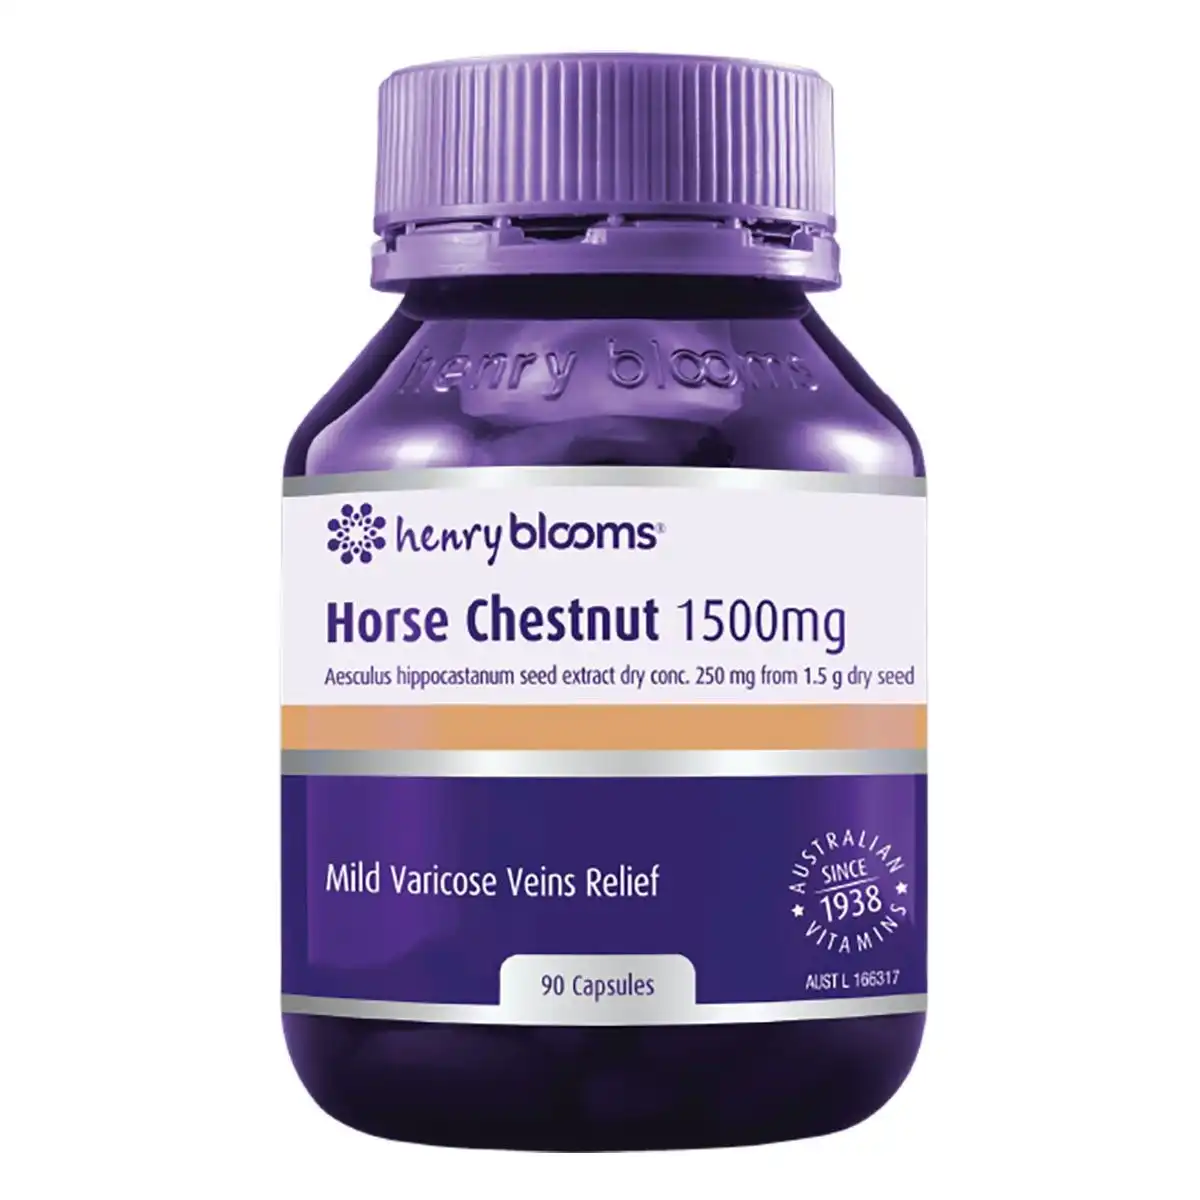 Blooms Horse Chestnut 1500mg 90 Capsules